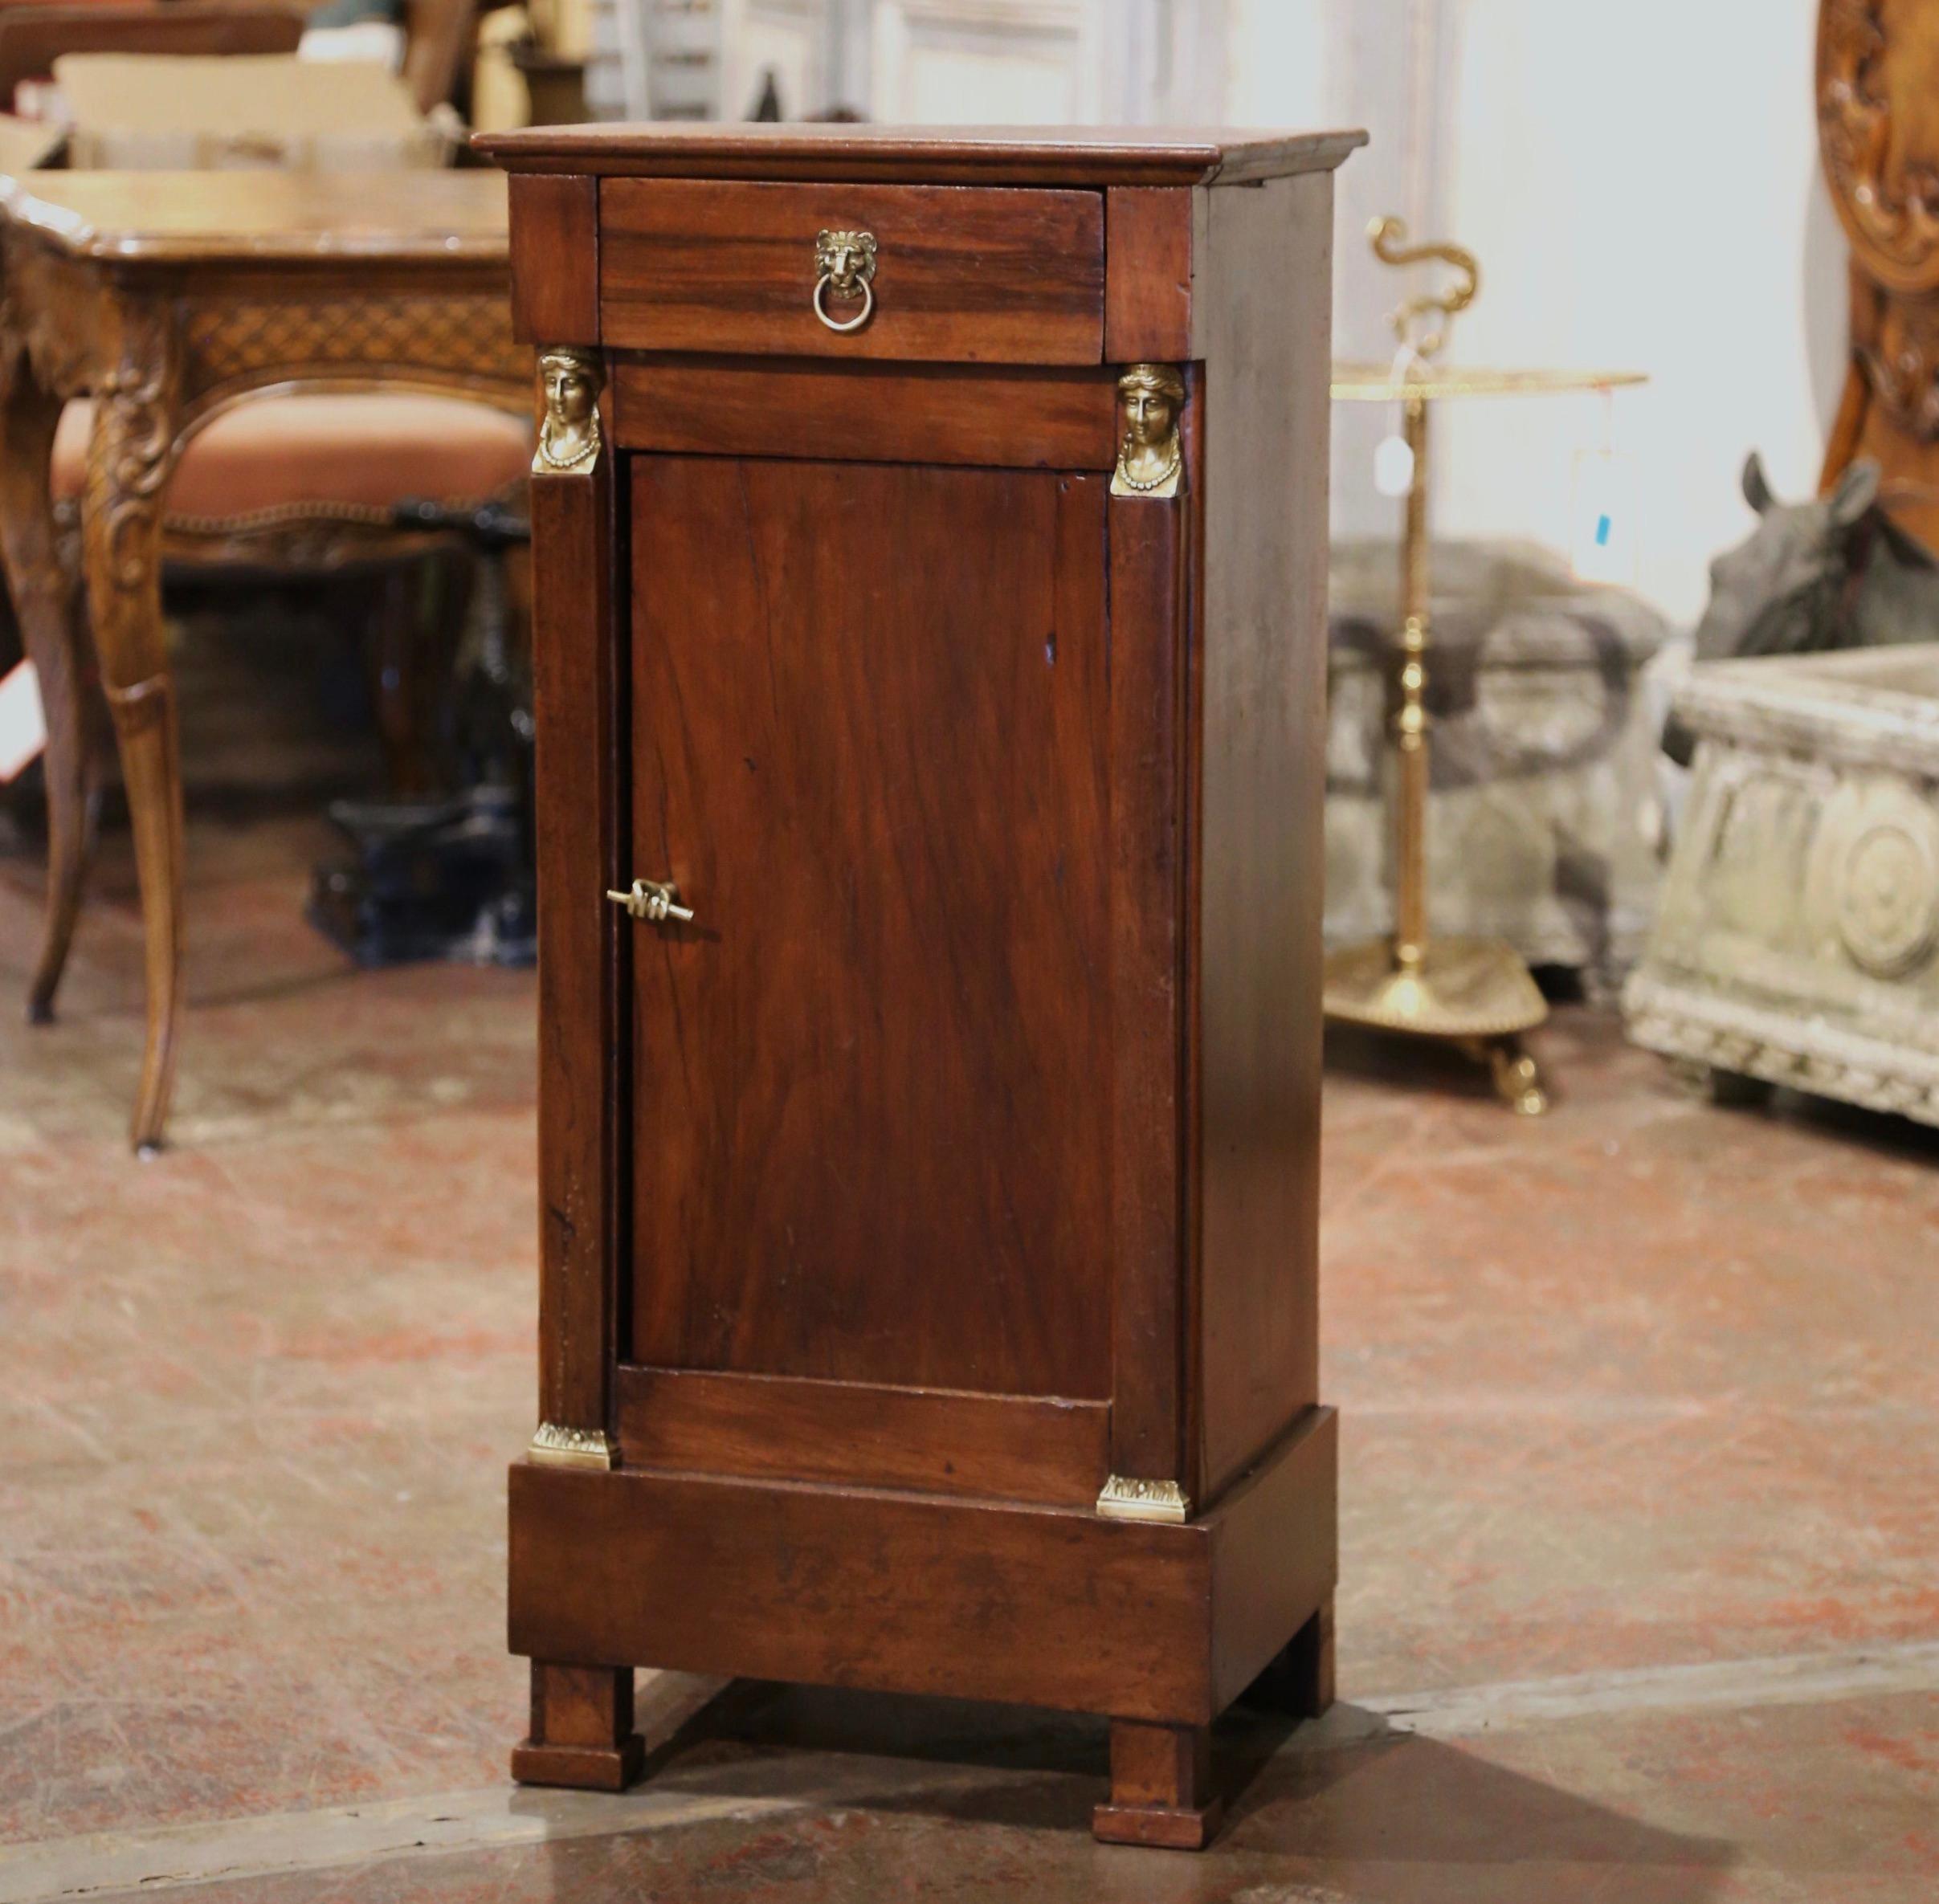 Hand-Crafted 19th Century French Empire Walnut Nightstand Bedside Table with Bronze Mounts